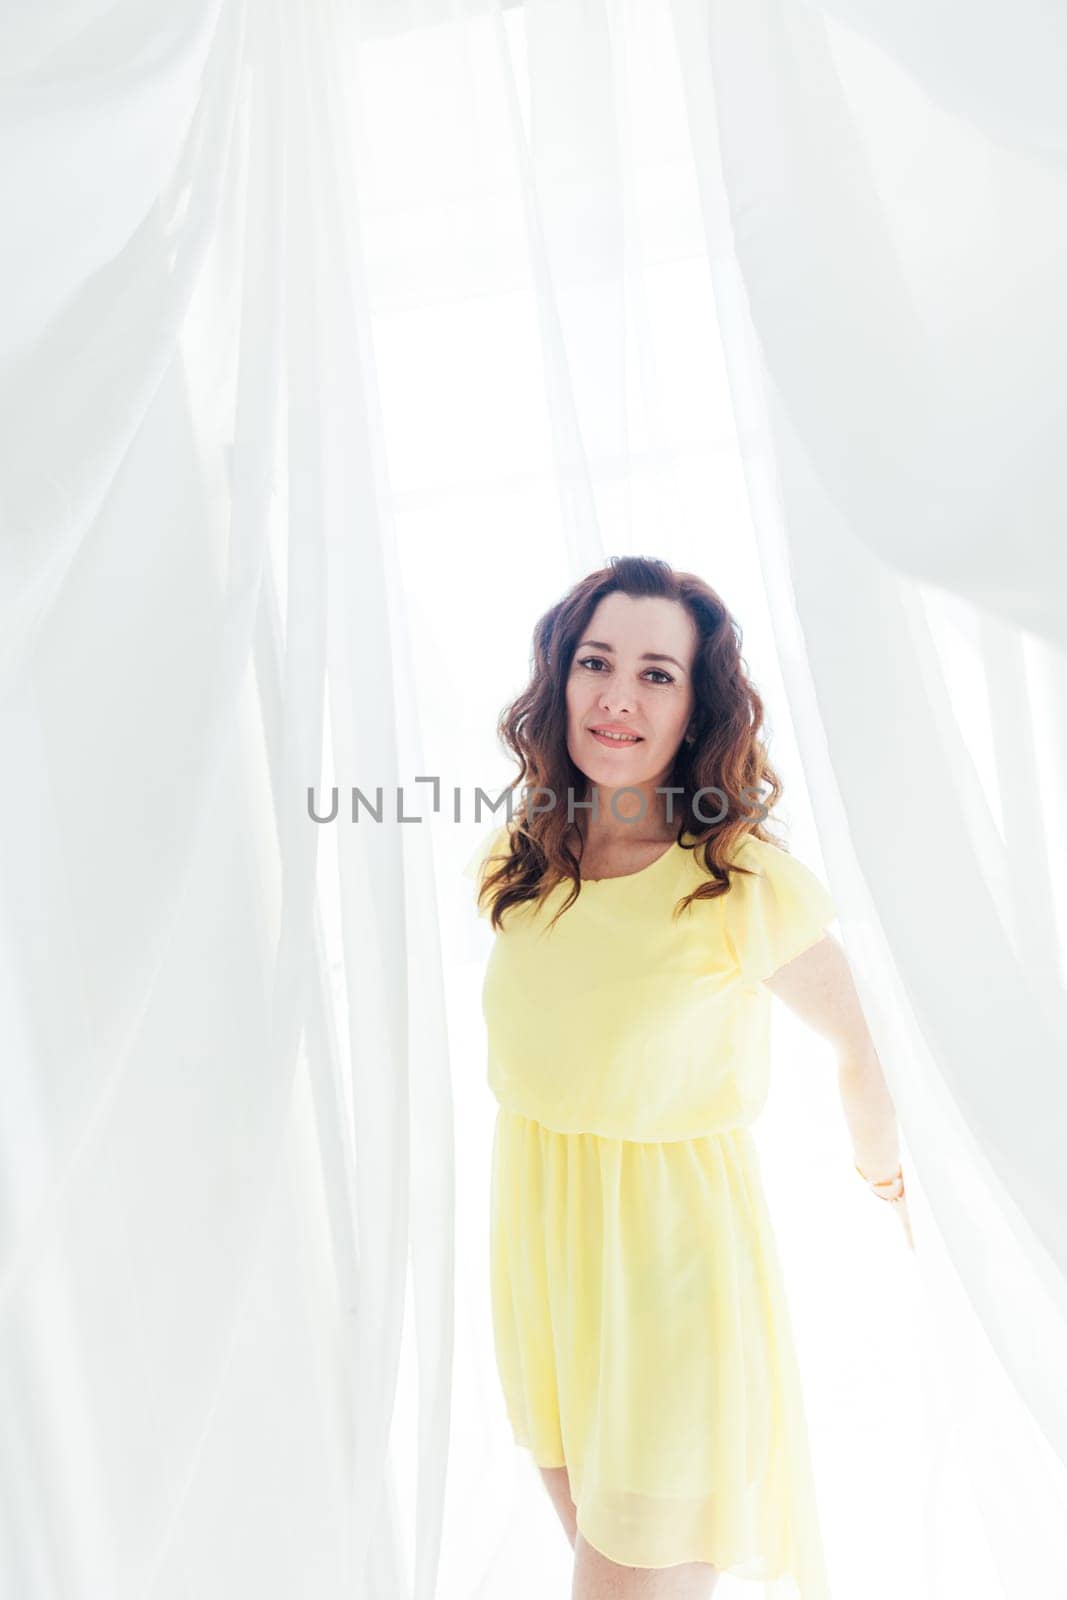 beautiful brunette woman in yellow dress stands at the white curtains of tulle fabrics in a bright room